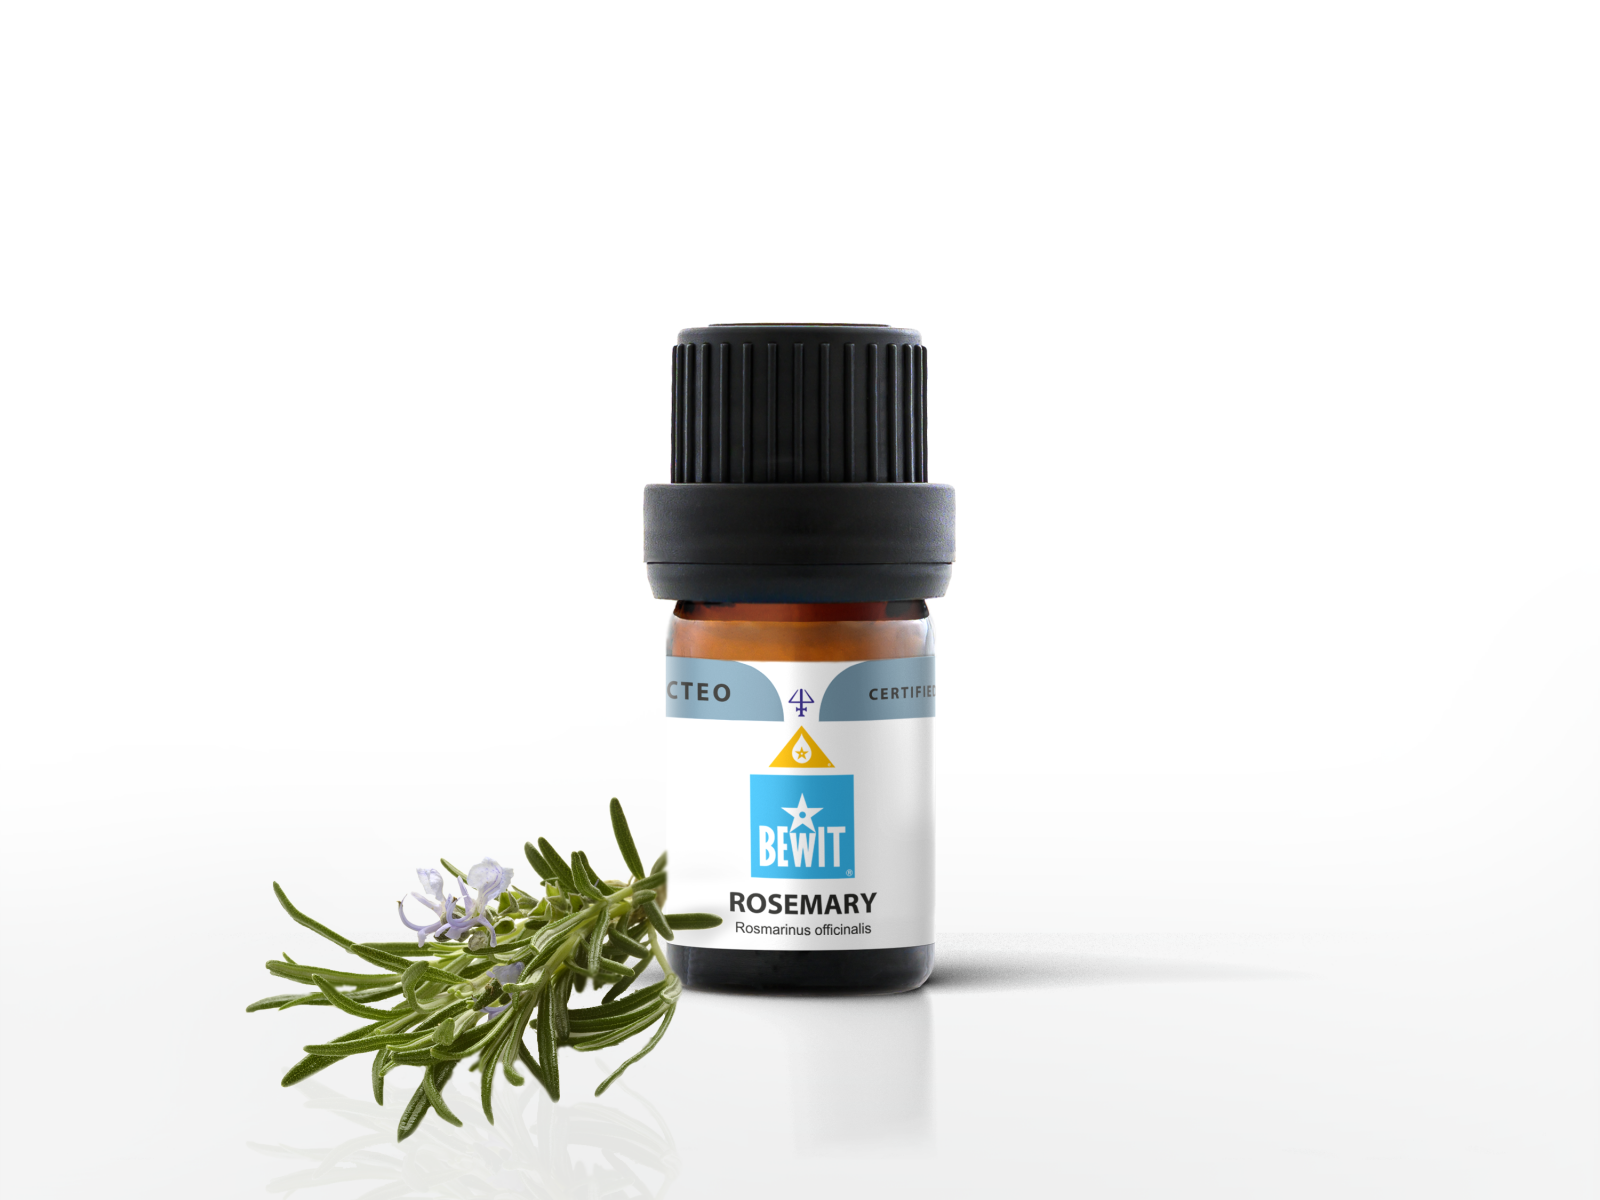 Rosemary - It is a 100% pure essential oil - 2